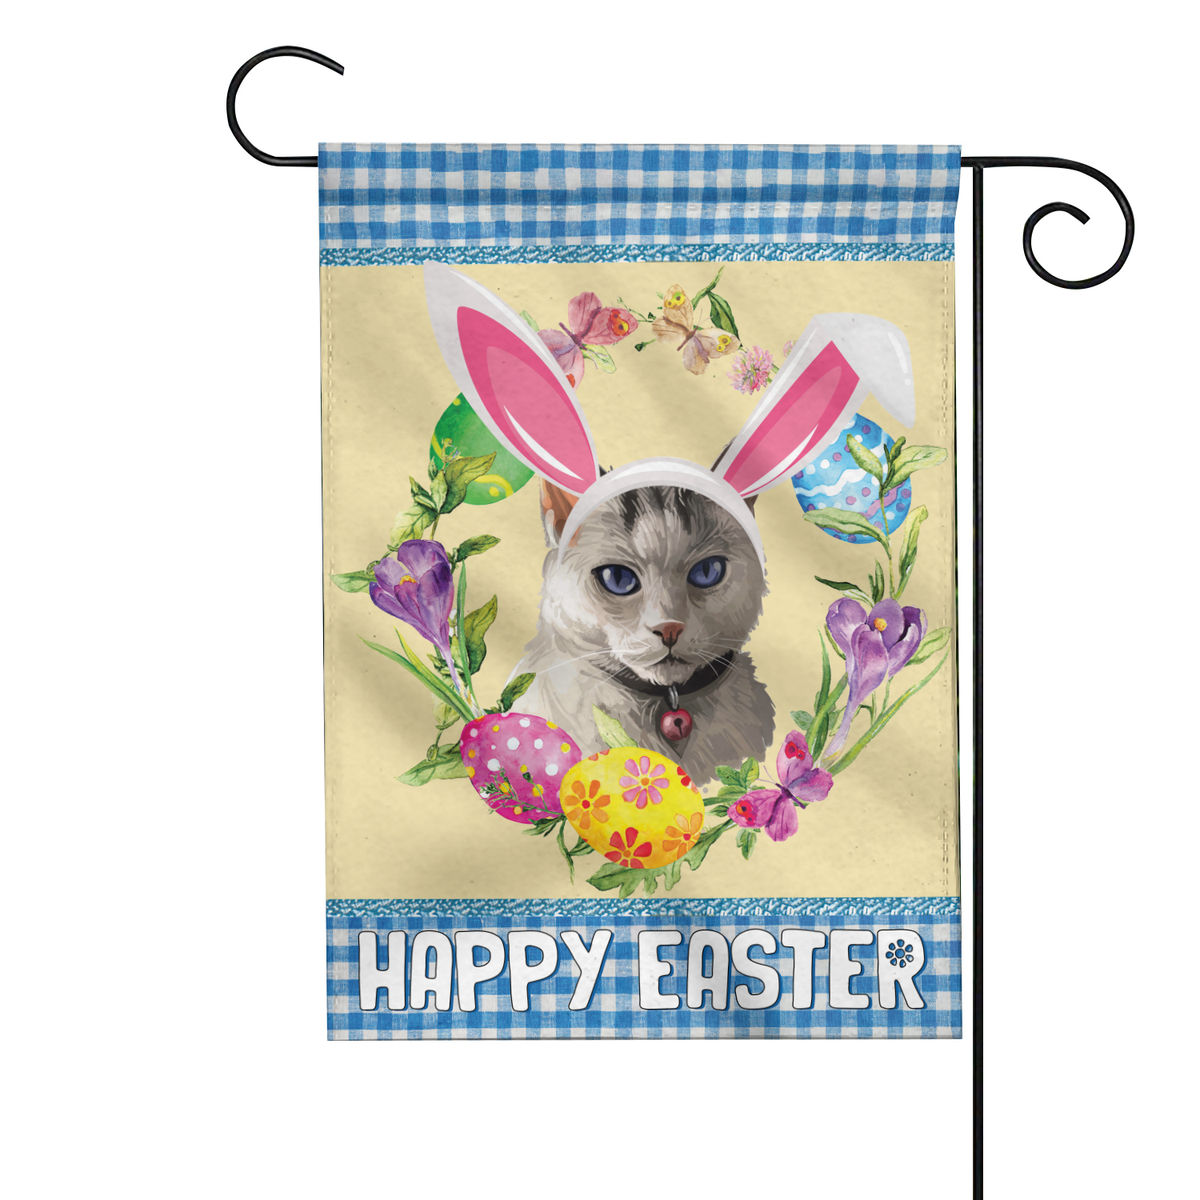 Happy Easter - Happy Easter Colorpoint Shorthair Cat Flag Colorpoint Shorthair Cat Bunny Easter Eggs Spring Garden Flag Easter Welcome Flag 24505_4